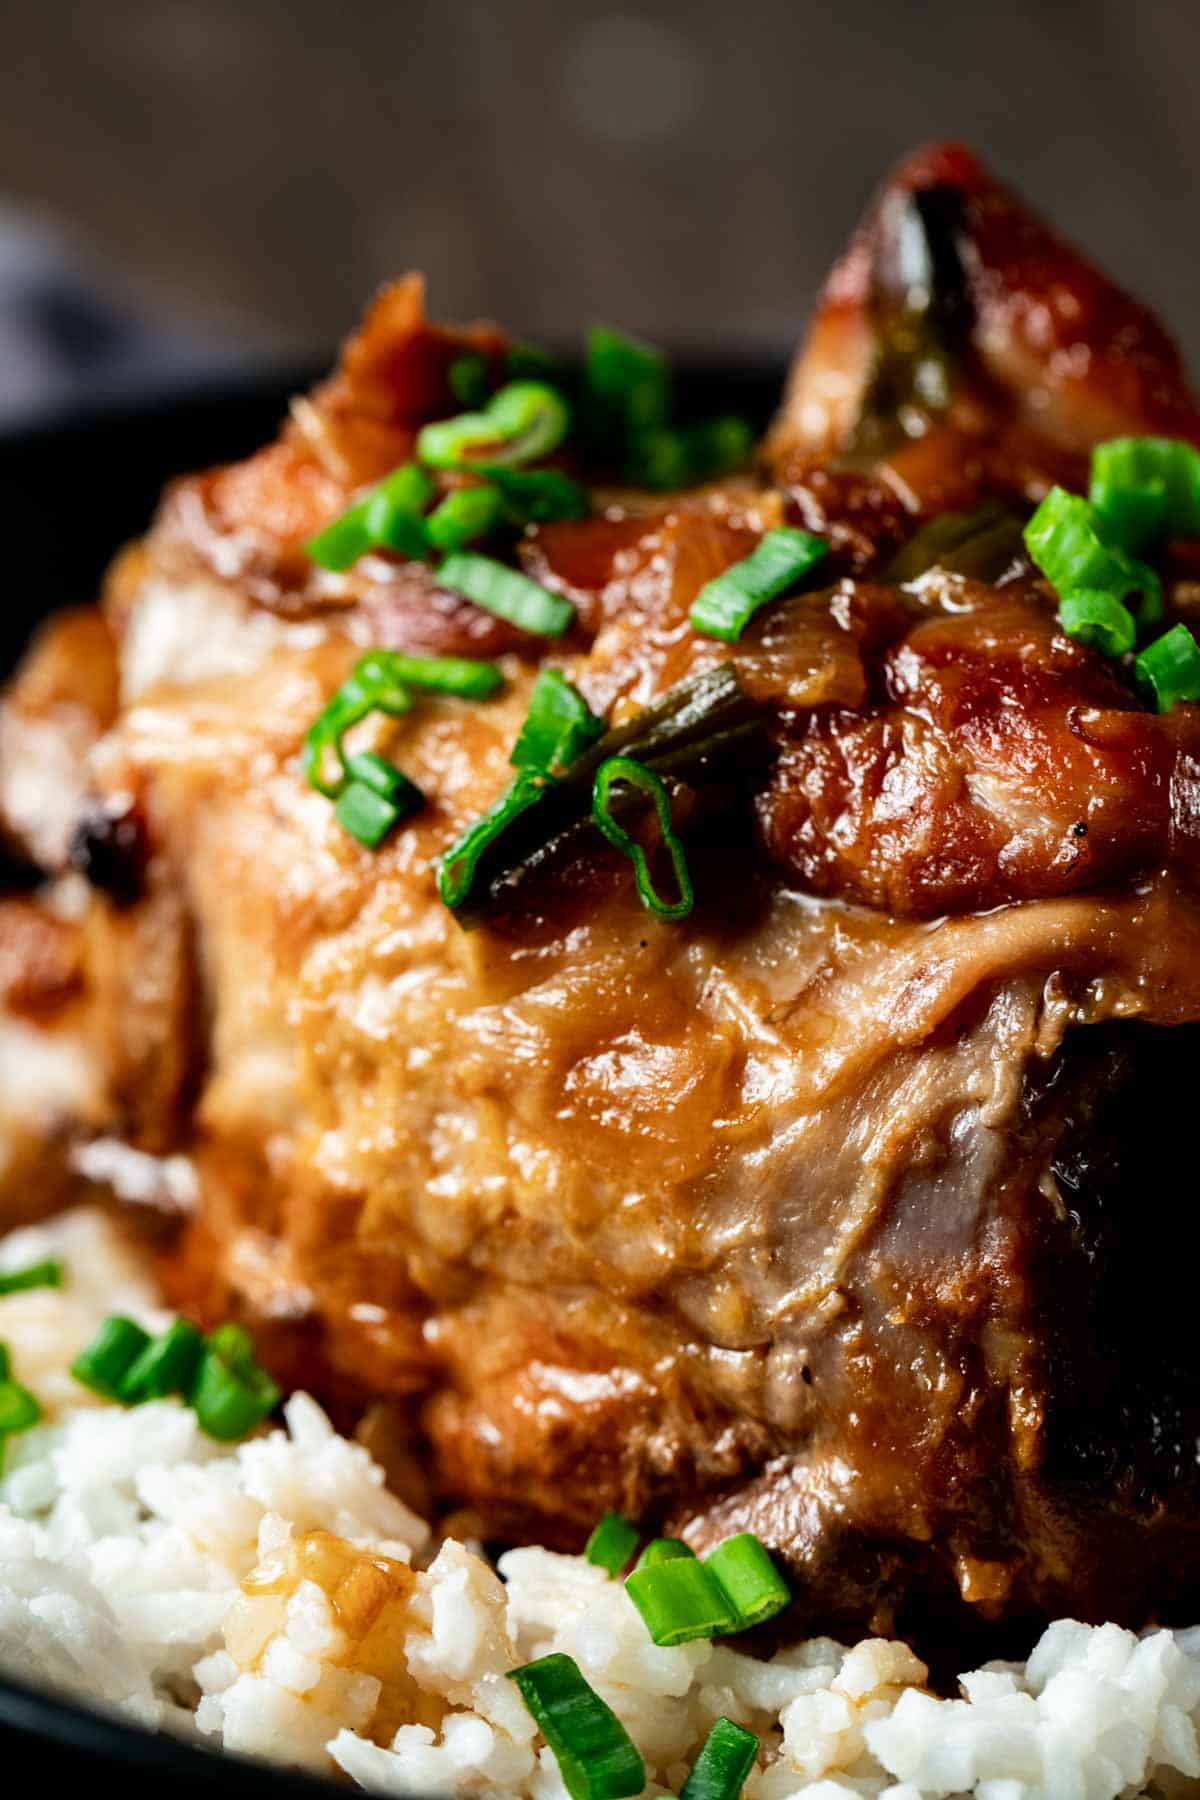 view of pork on a bed of rice ready to eat